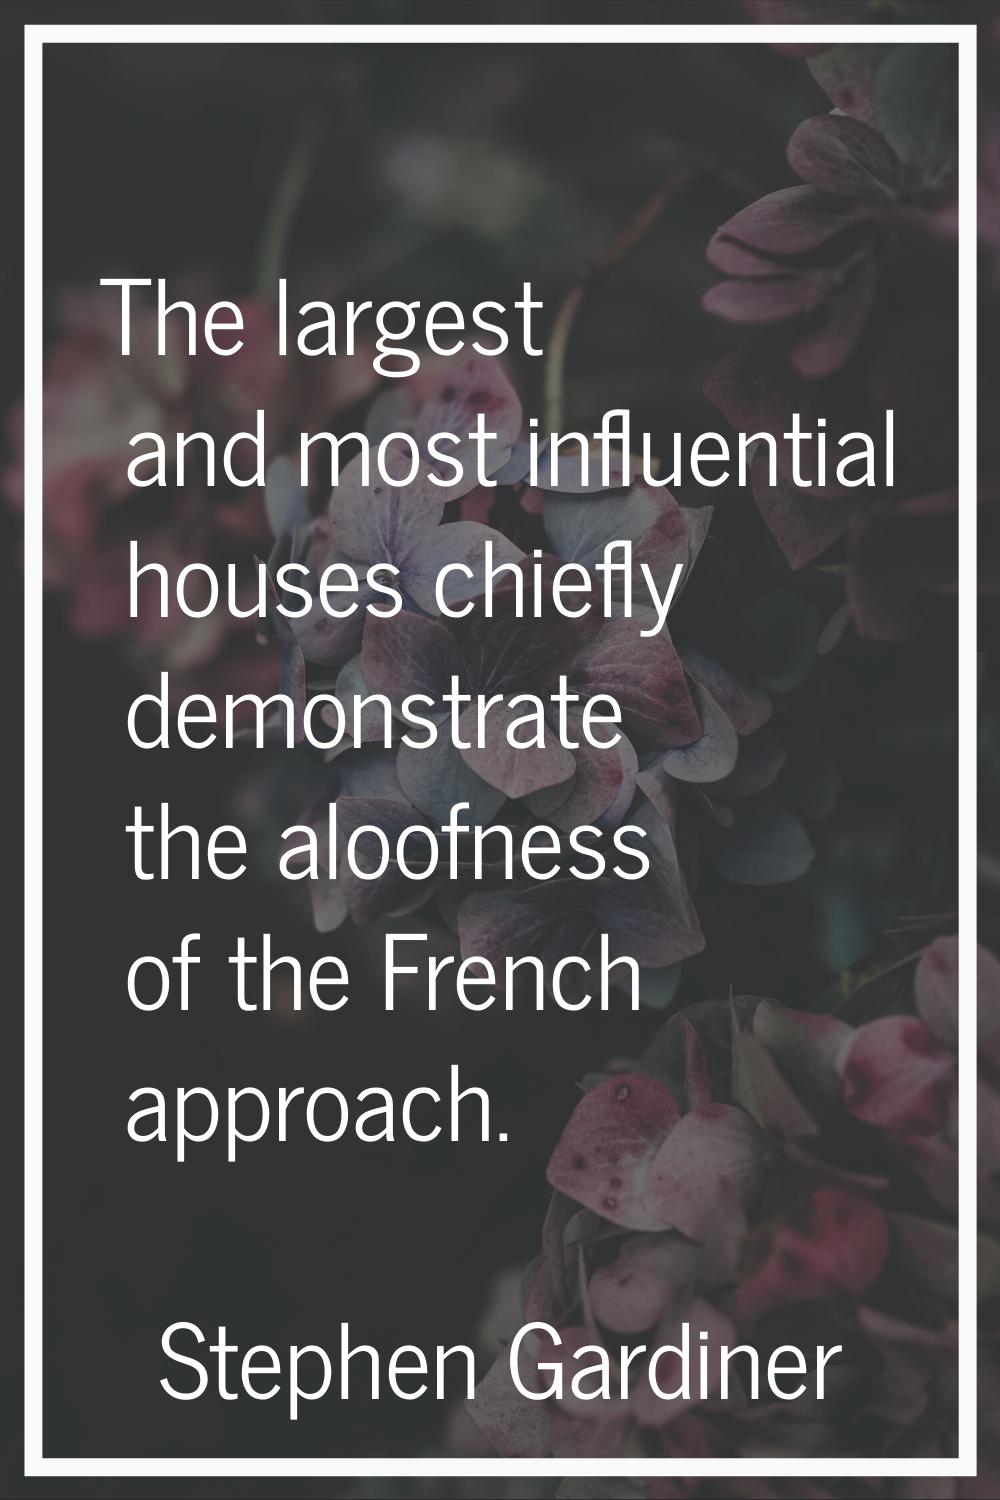 The largest and most influential houses chiefly demonstrate the aloofness of the French approach.